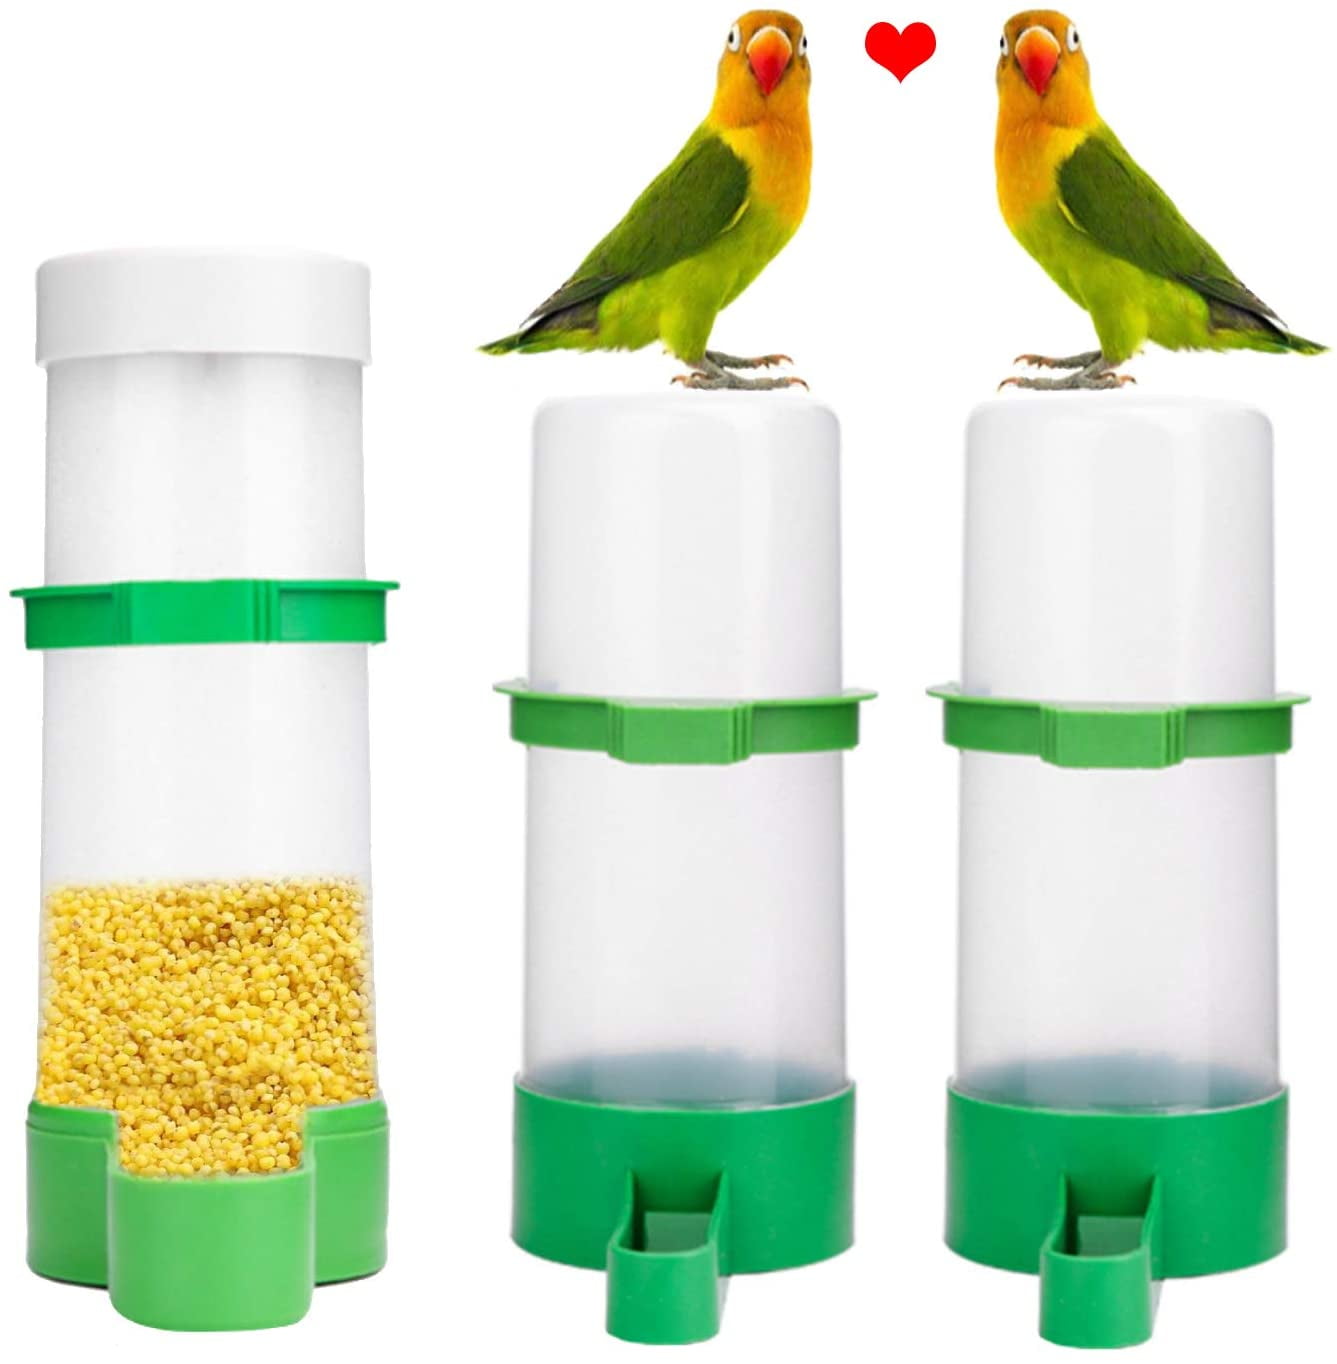 4X Pet Cage Aviary Bird Parrot Budgie Canary Drinker Food Feeder Waterer Clip US 